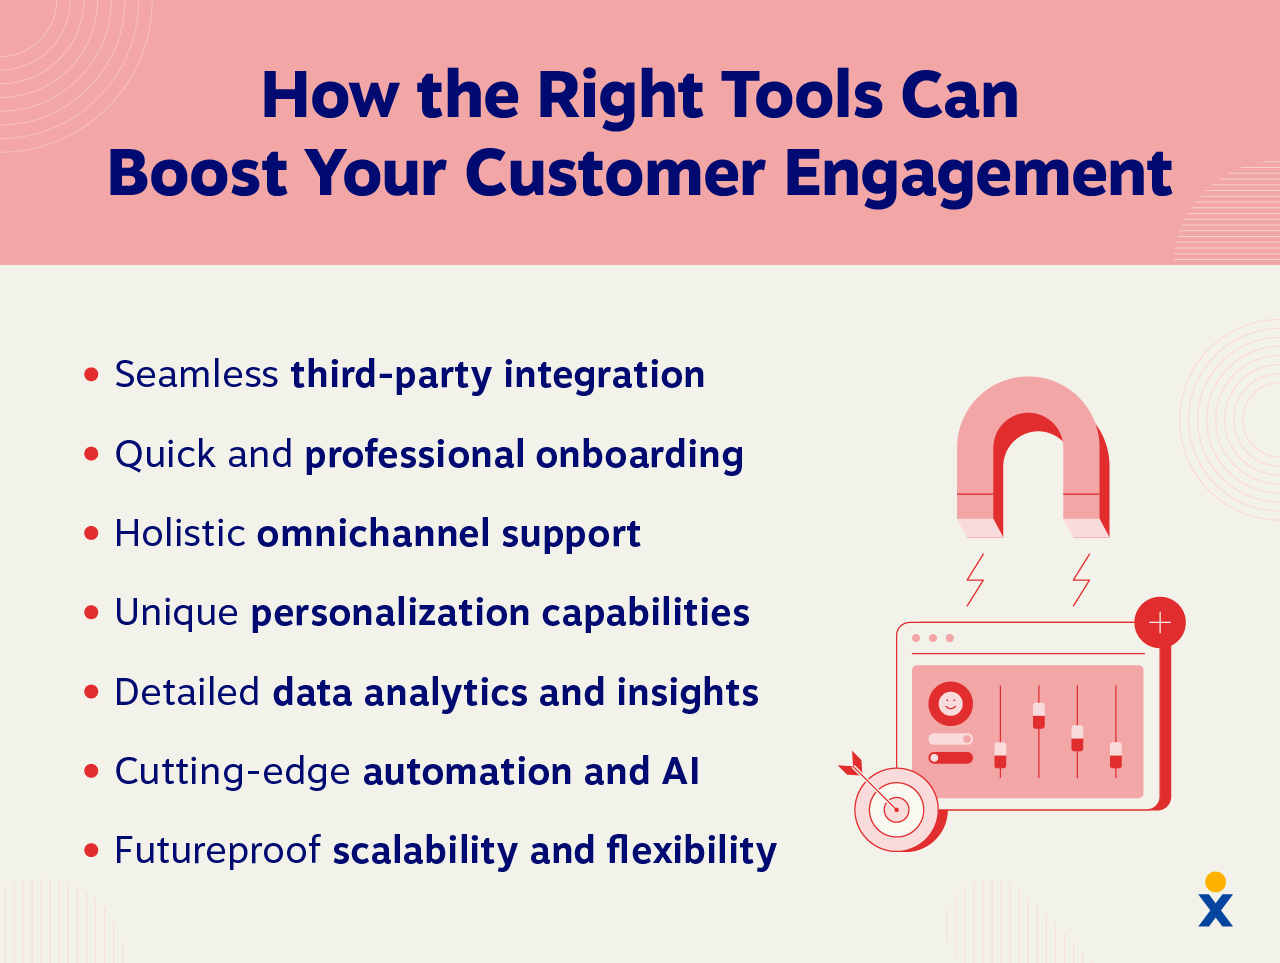 Customer engagement tools offer several benefits to businesses to help integrate with your business systems and assess ROI.